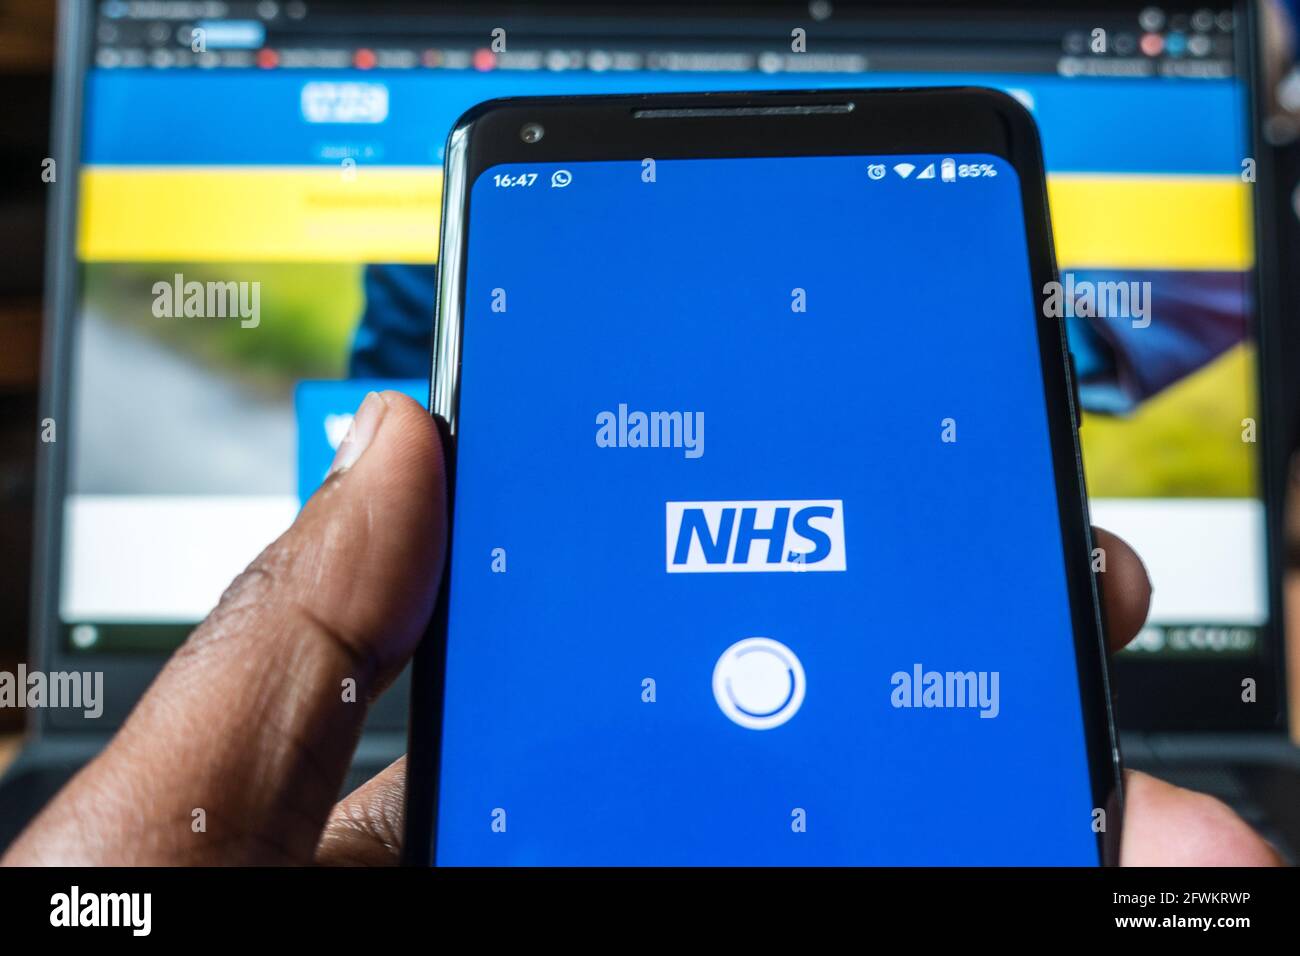 NHS National Health Services for United Kingdom mobile app service Stock Photo